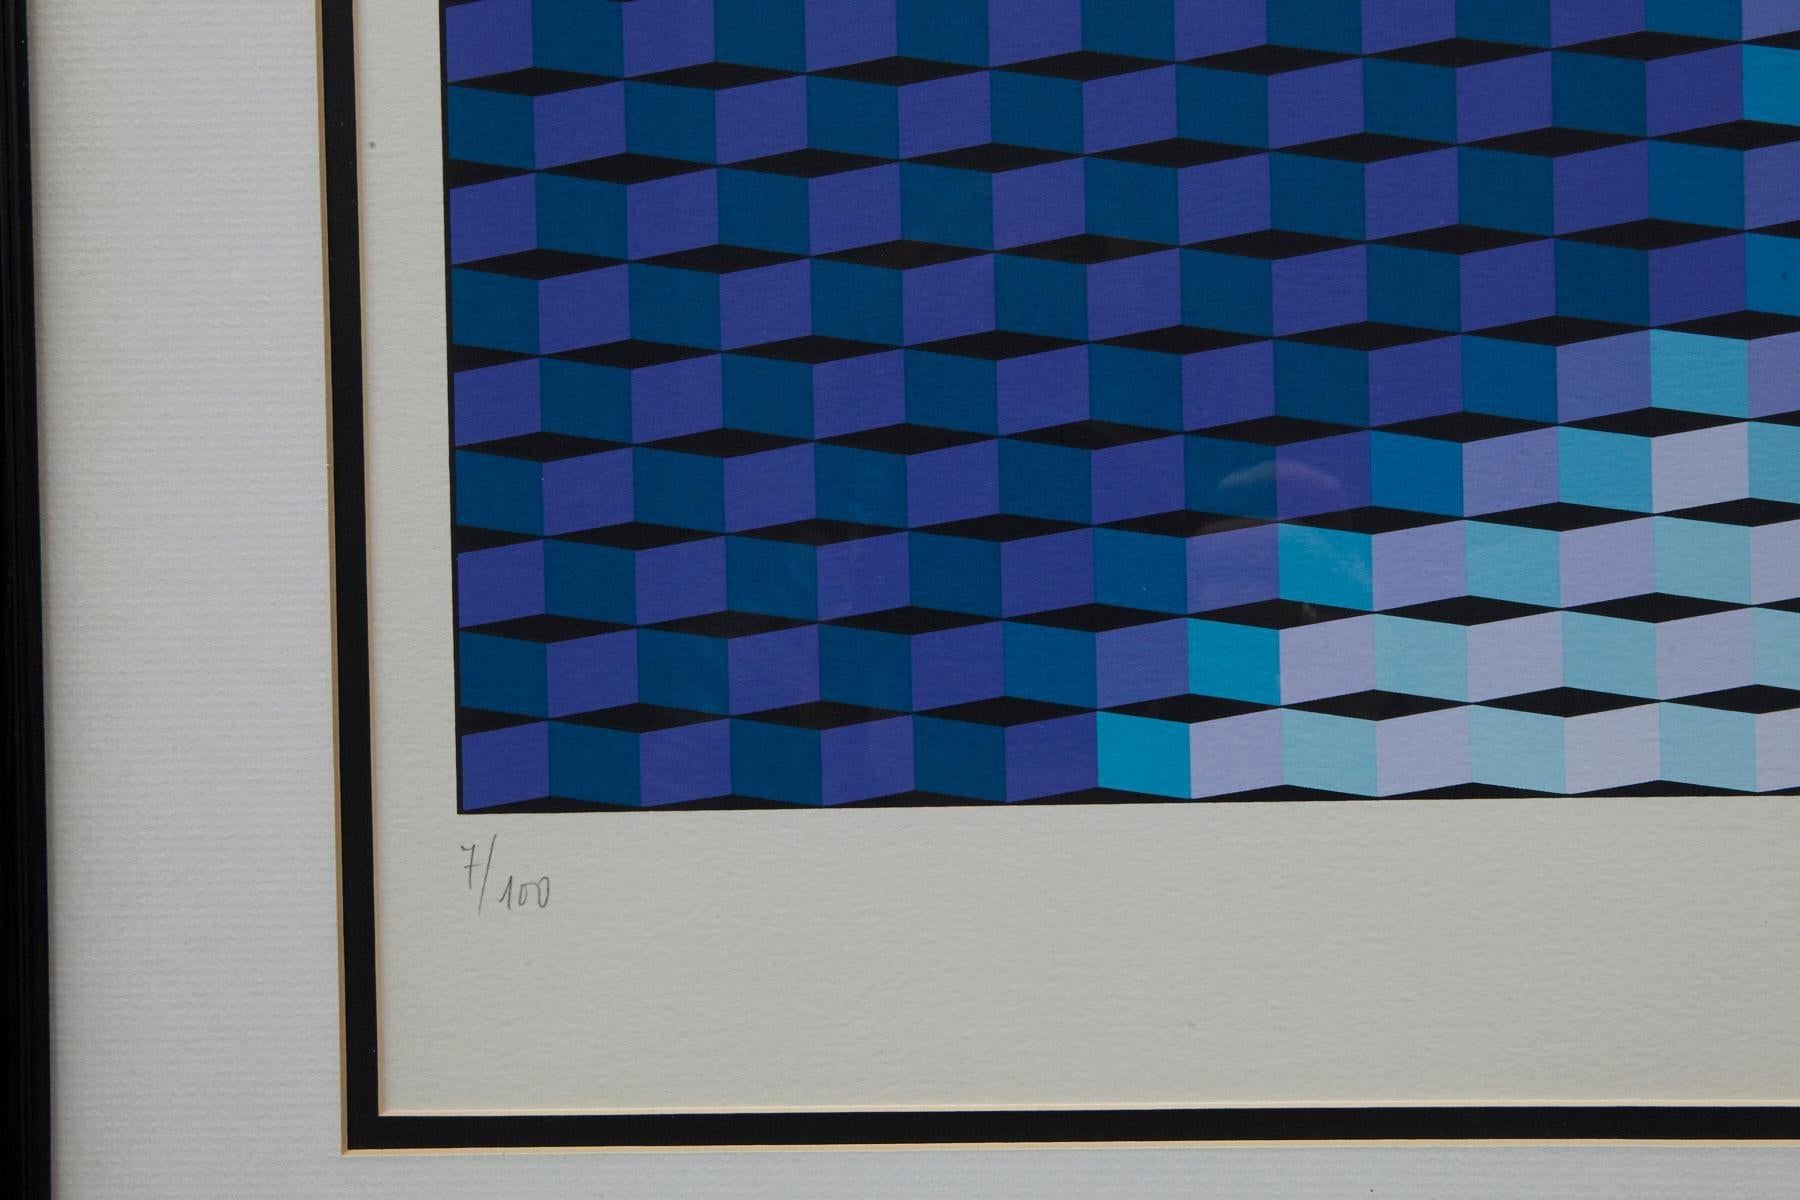 Mona Lisa - Gray Abstract Print by Yvaral (Jean-Pierre Vasarely)